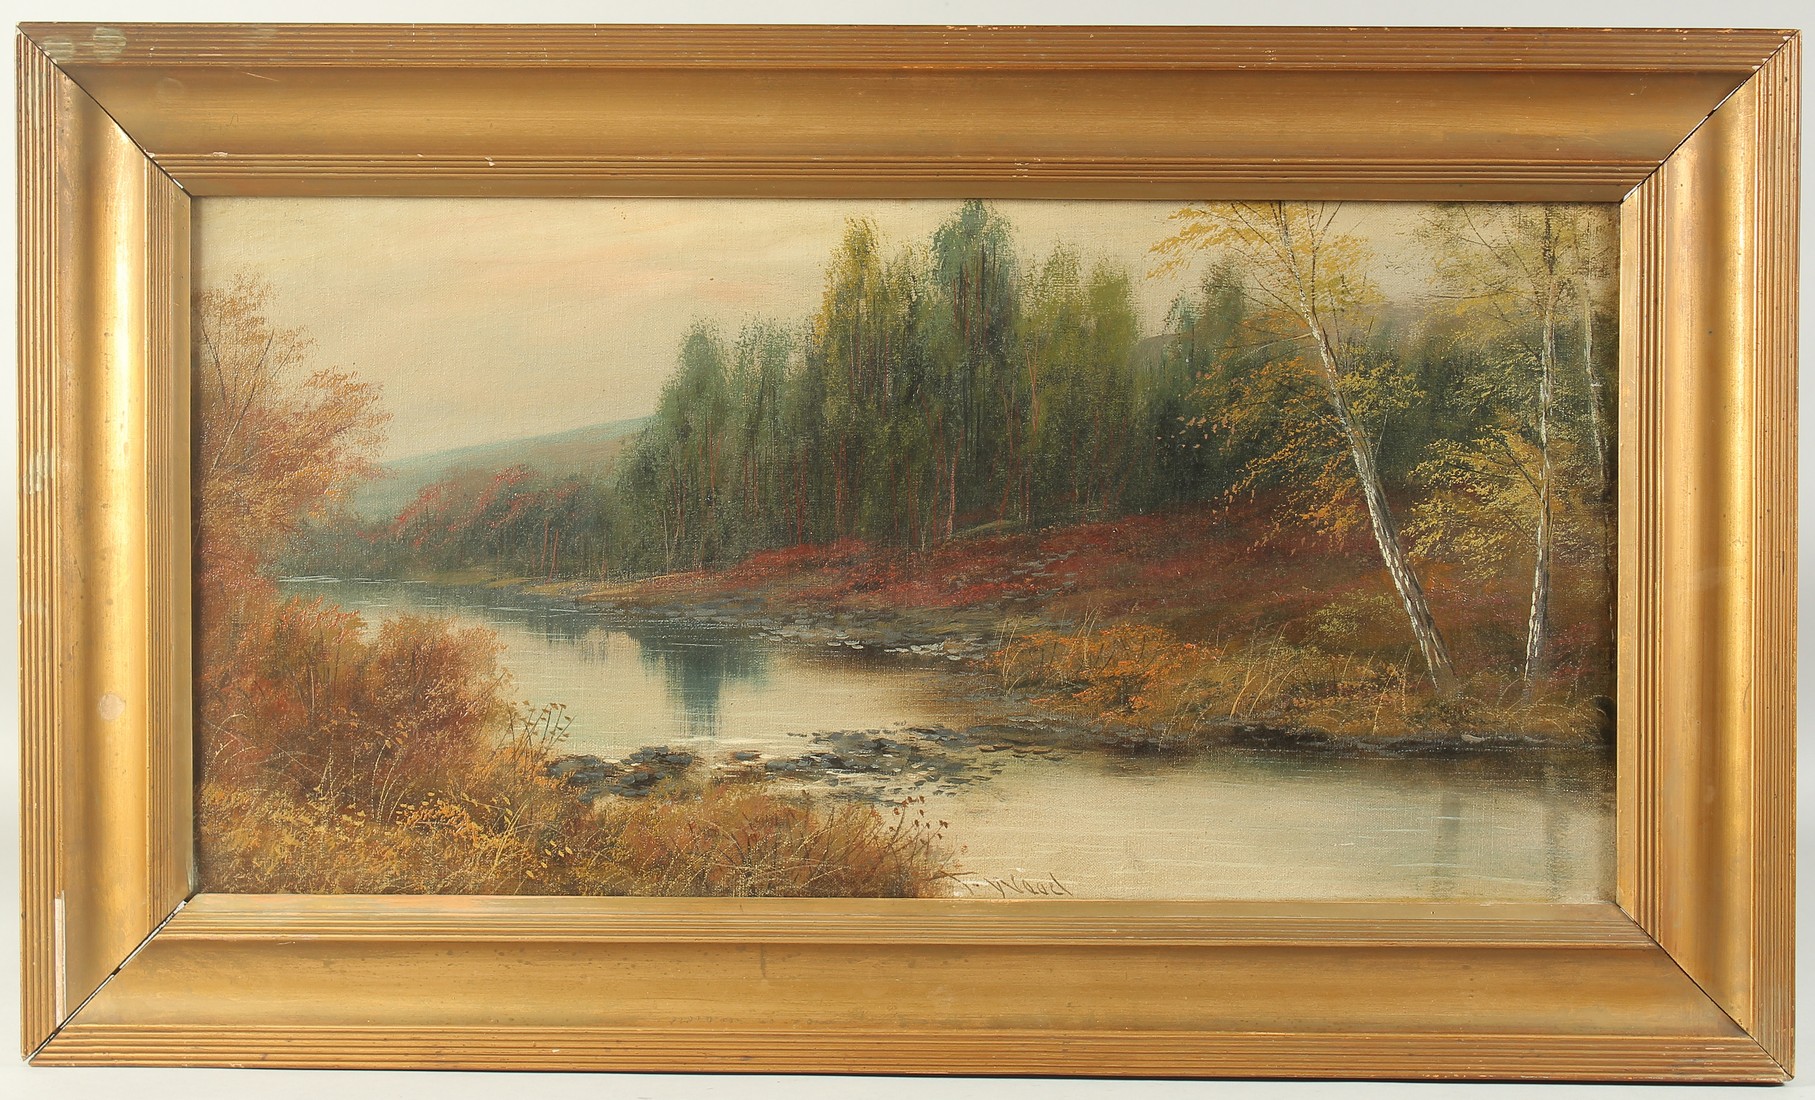 T. Wood, An Autumn view of a tranquil river scene, oil on canvas, signed, 12" x 24", (30.5x61cm).